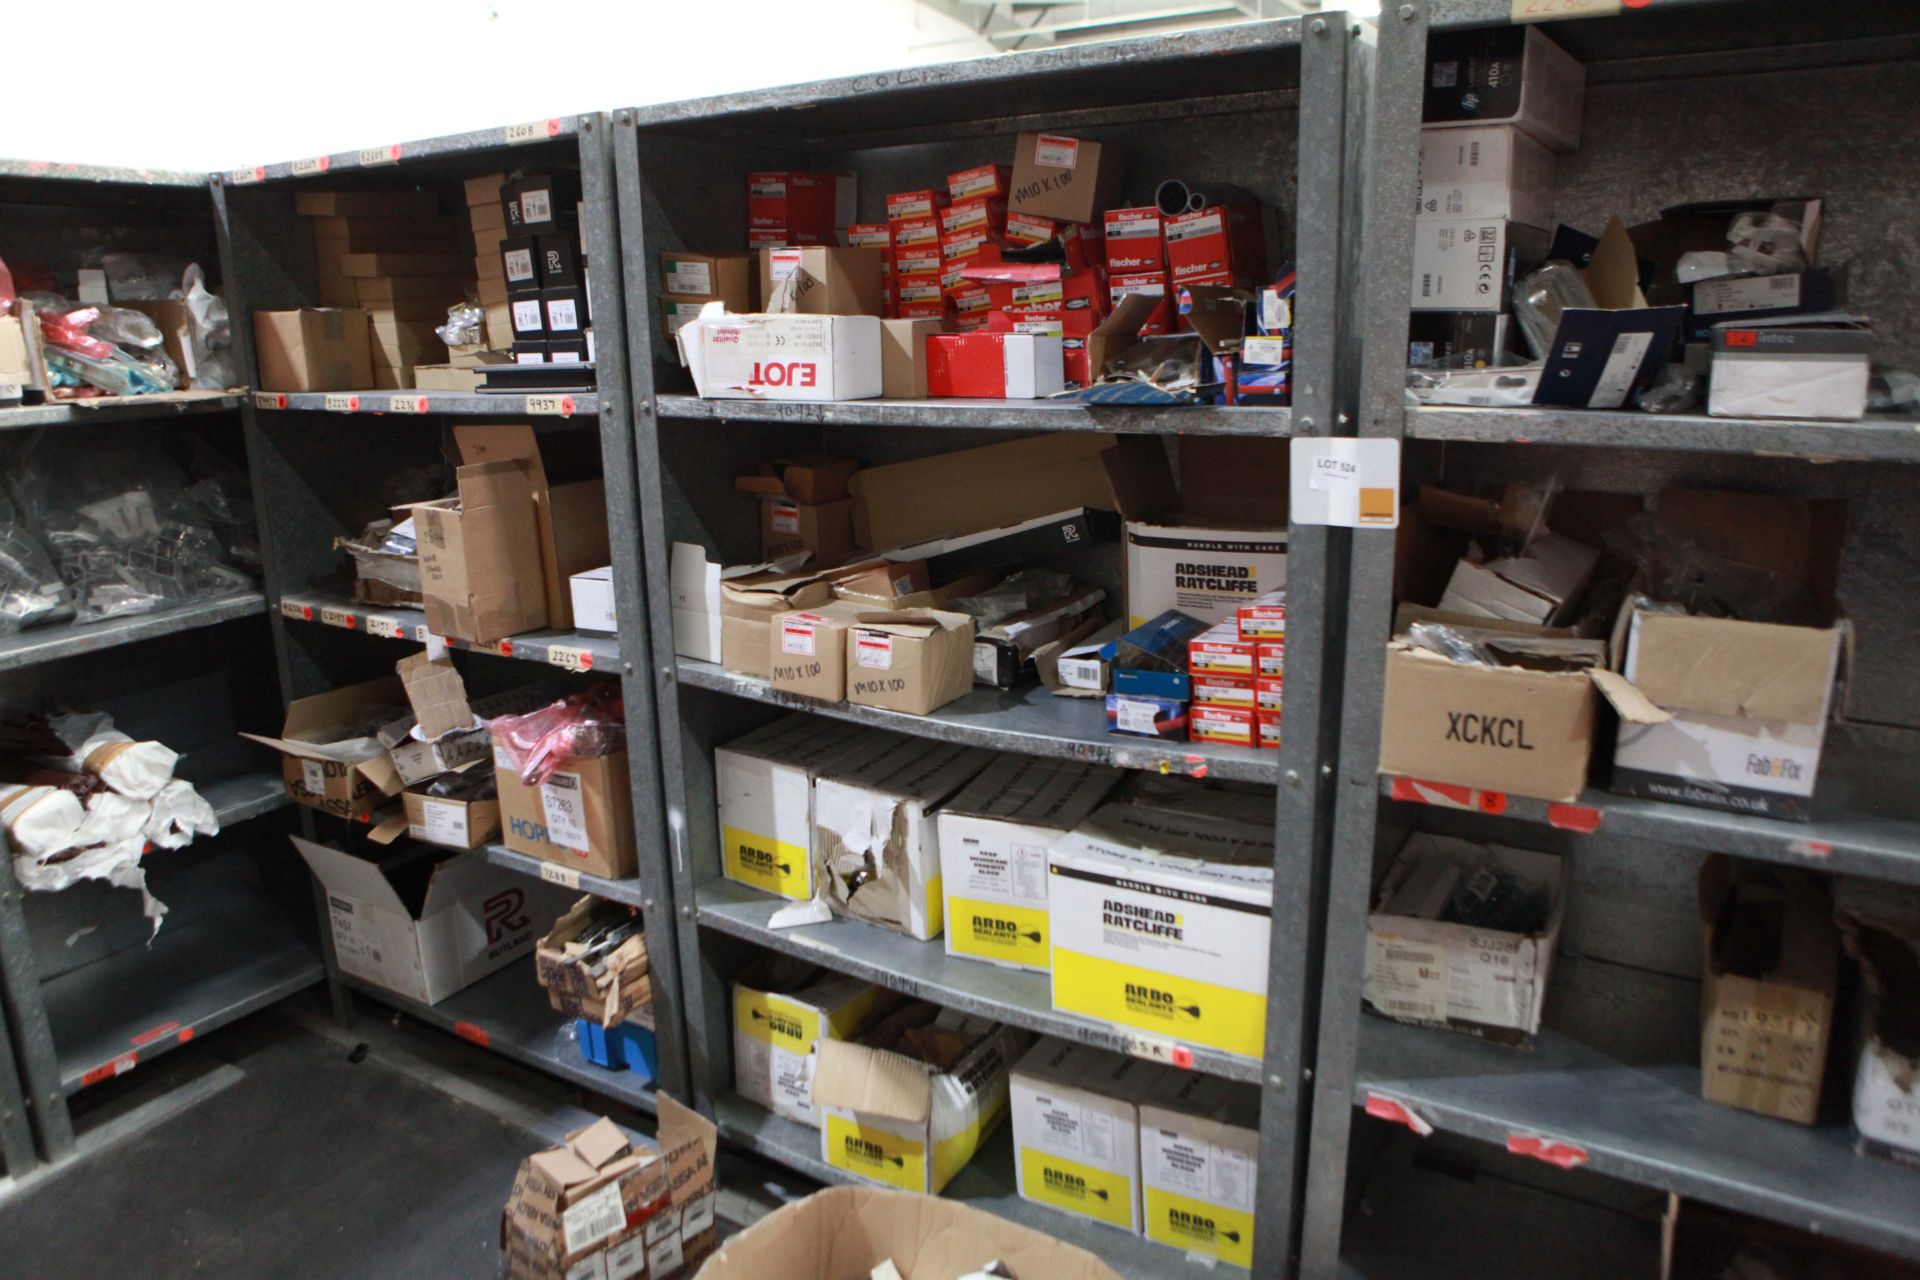 3 Bays of stores shelving